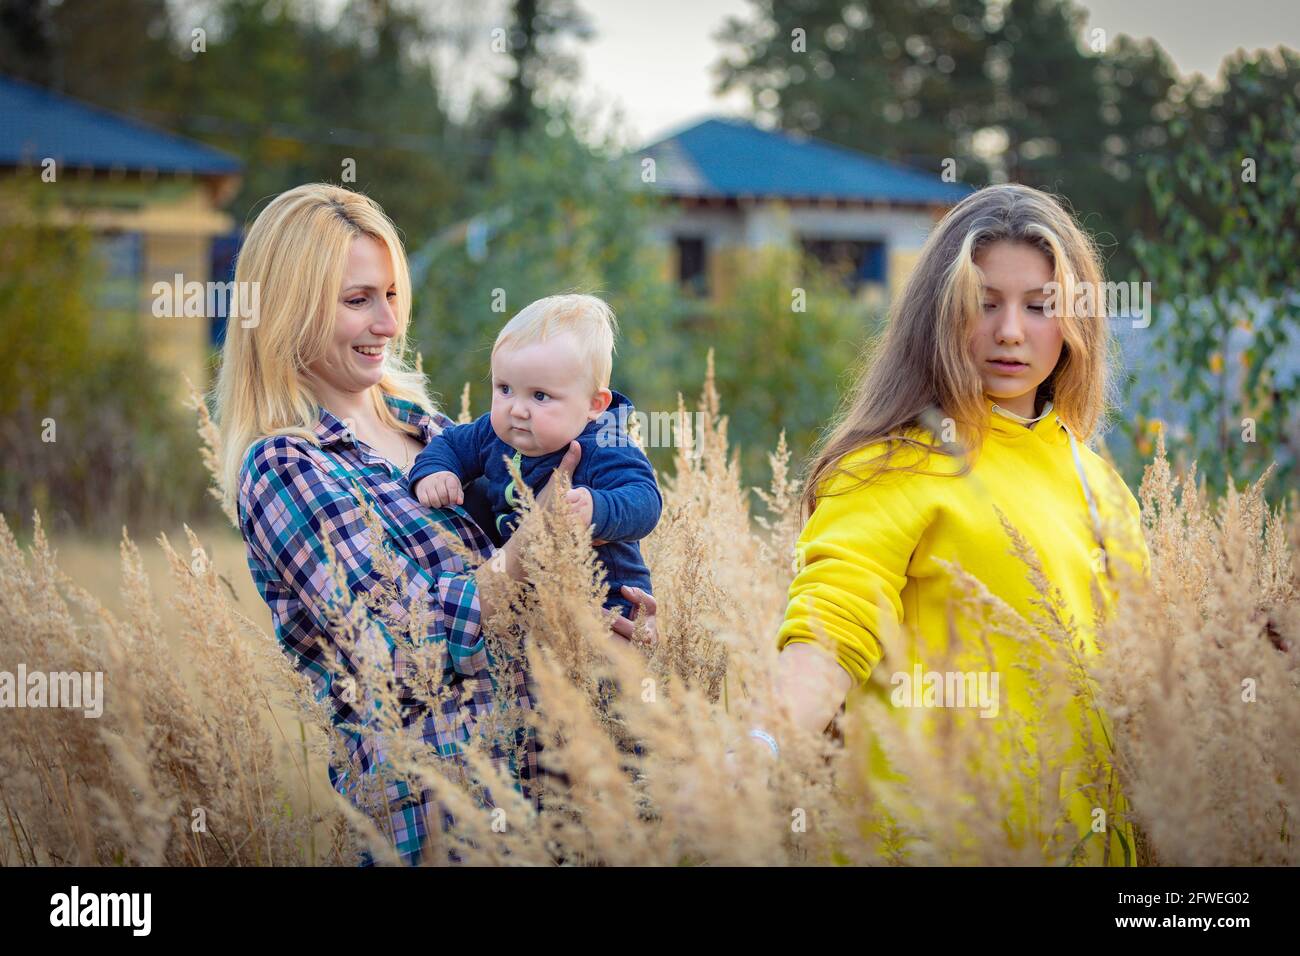 A young mother walks with her children in a field with tall grass. Mom holds the boy in her arms. A happy family Stock Photo